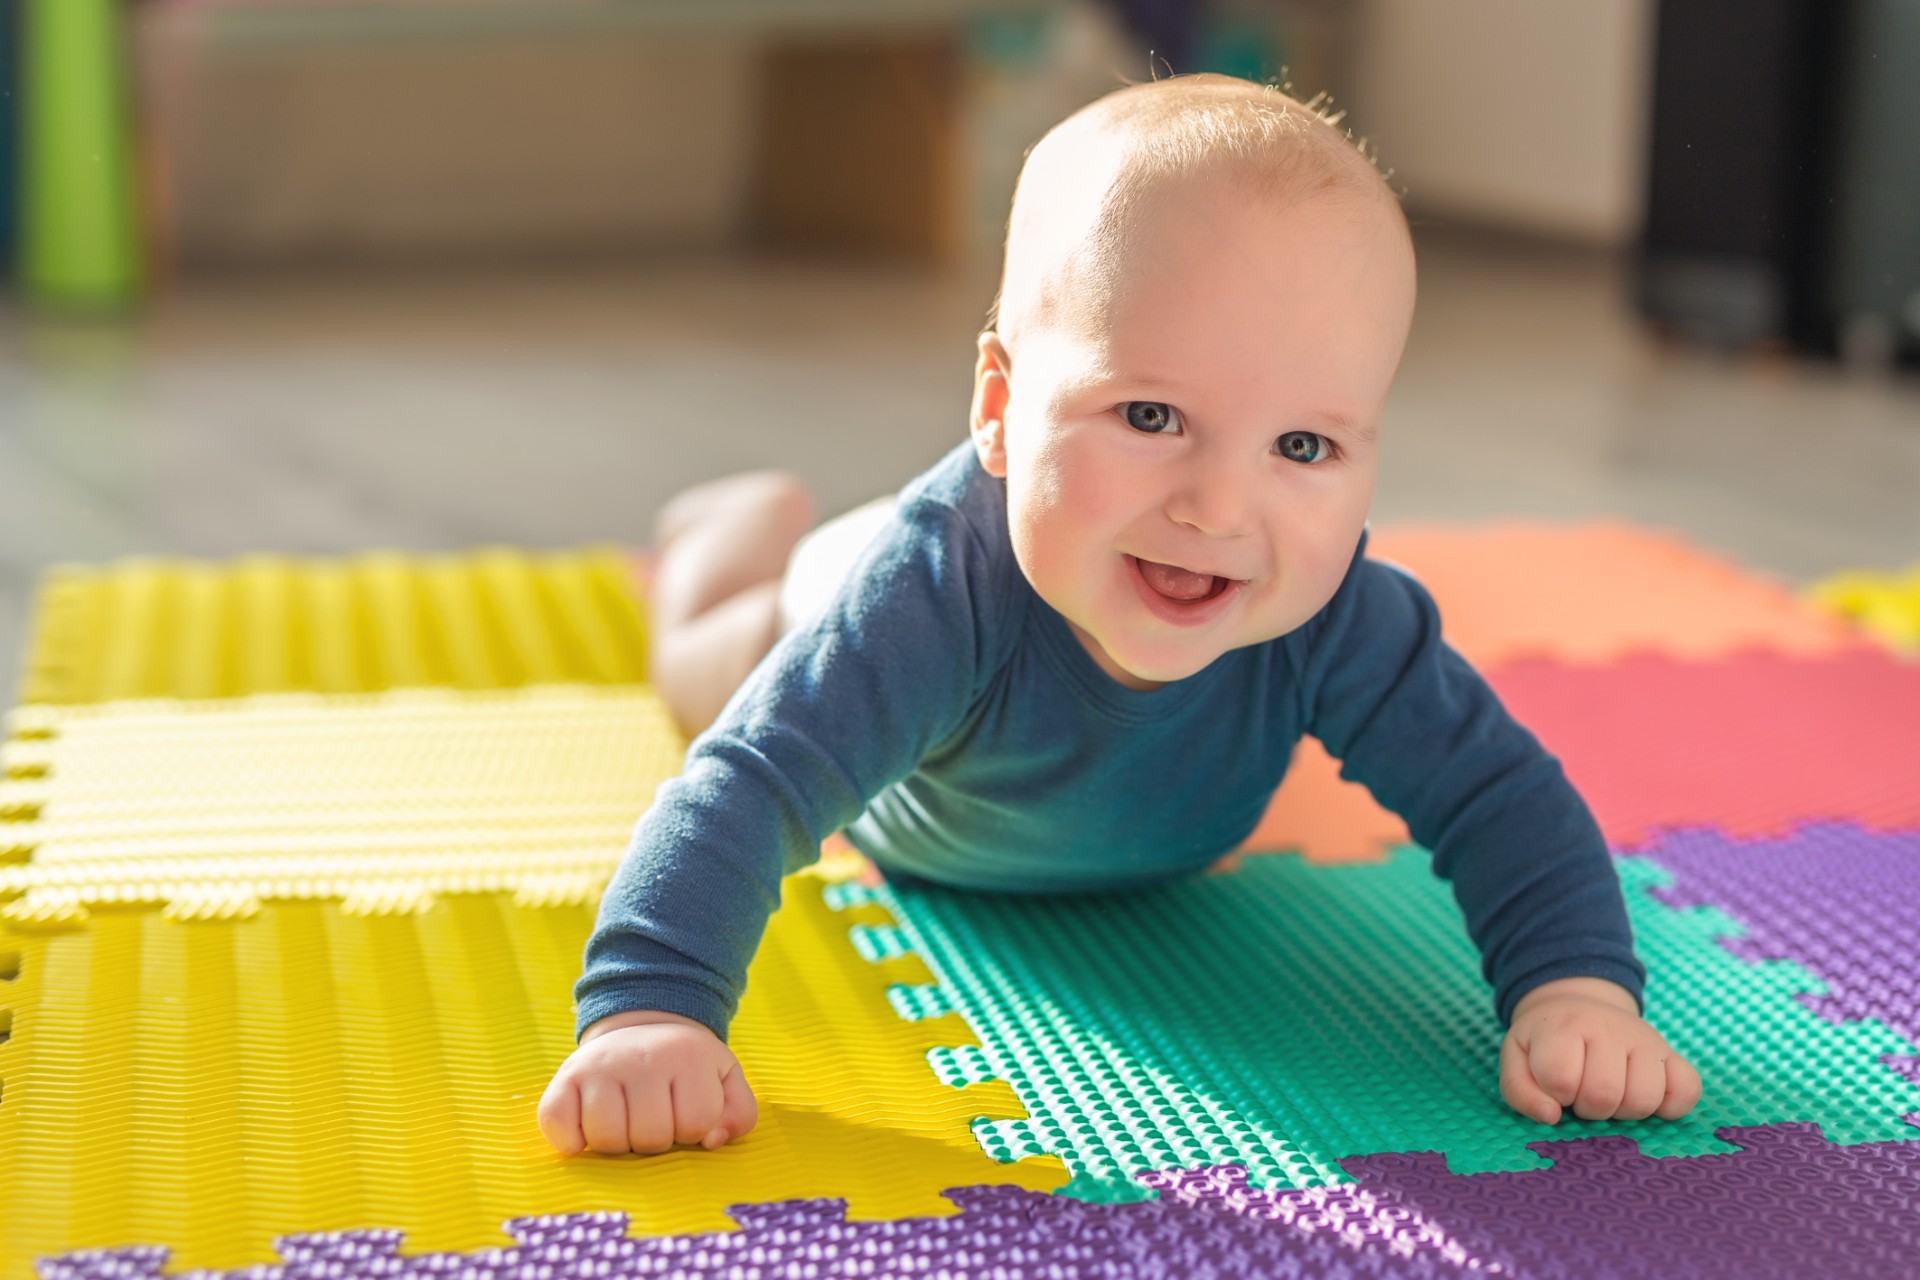 onderhoud toenemen cowboy When All Babies Should Get Their First Baby Play Mat and Why | NewFolks